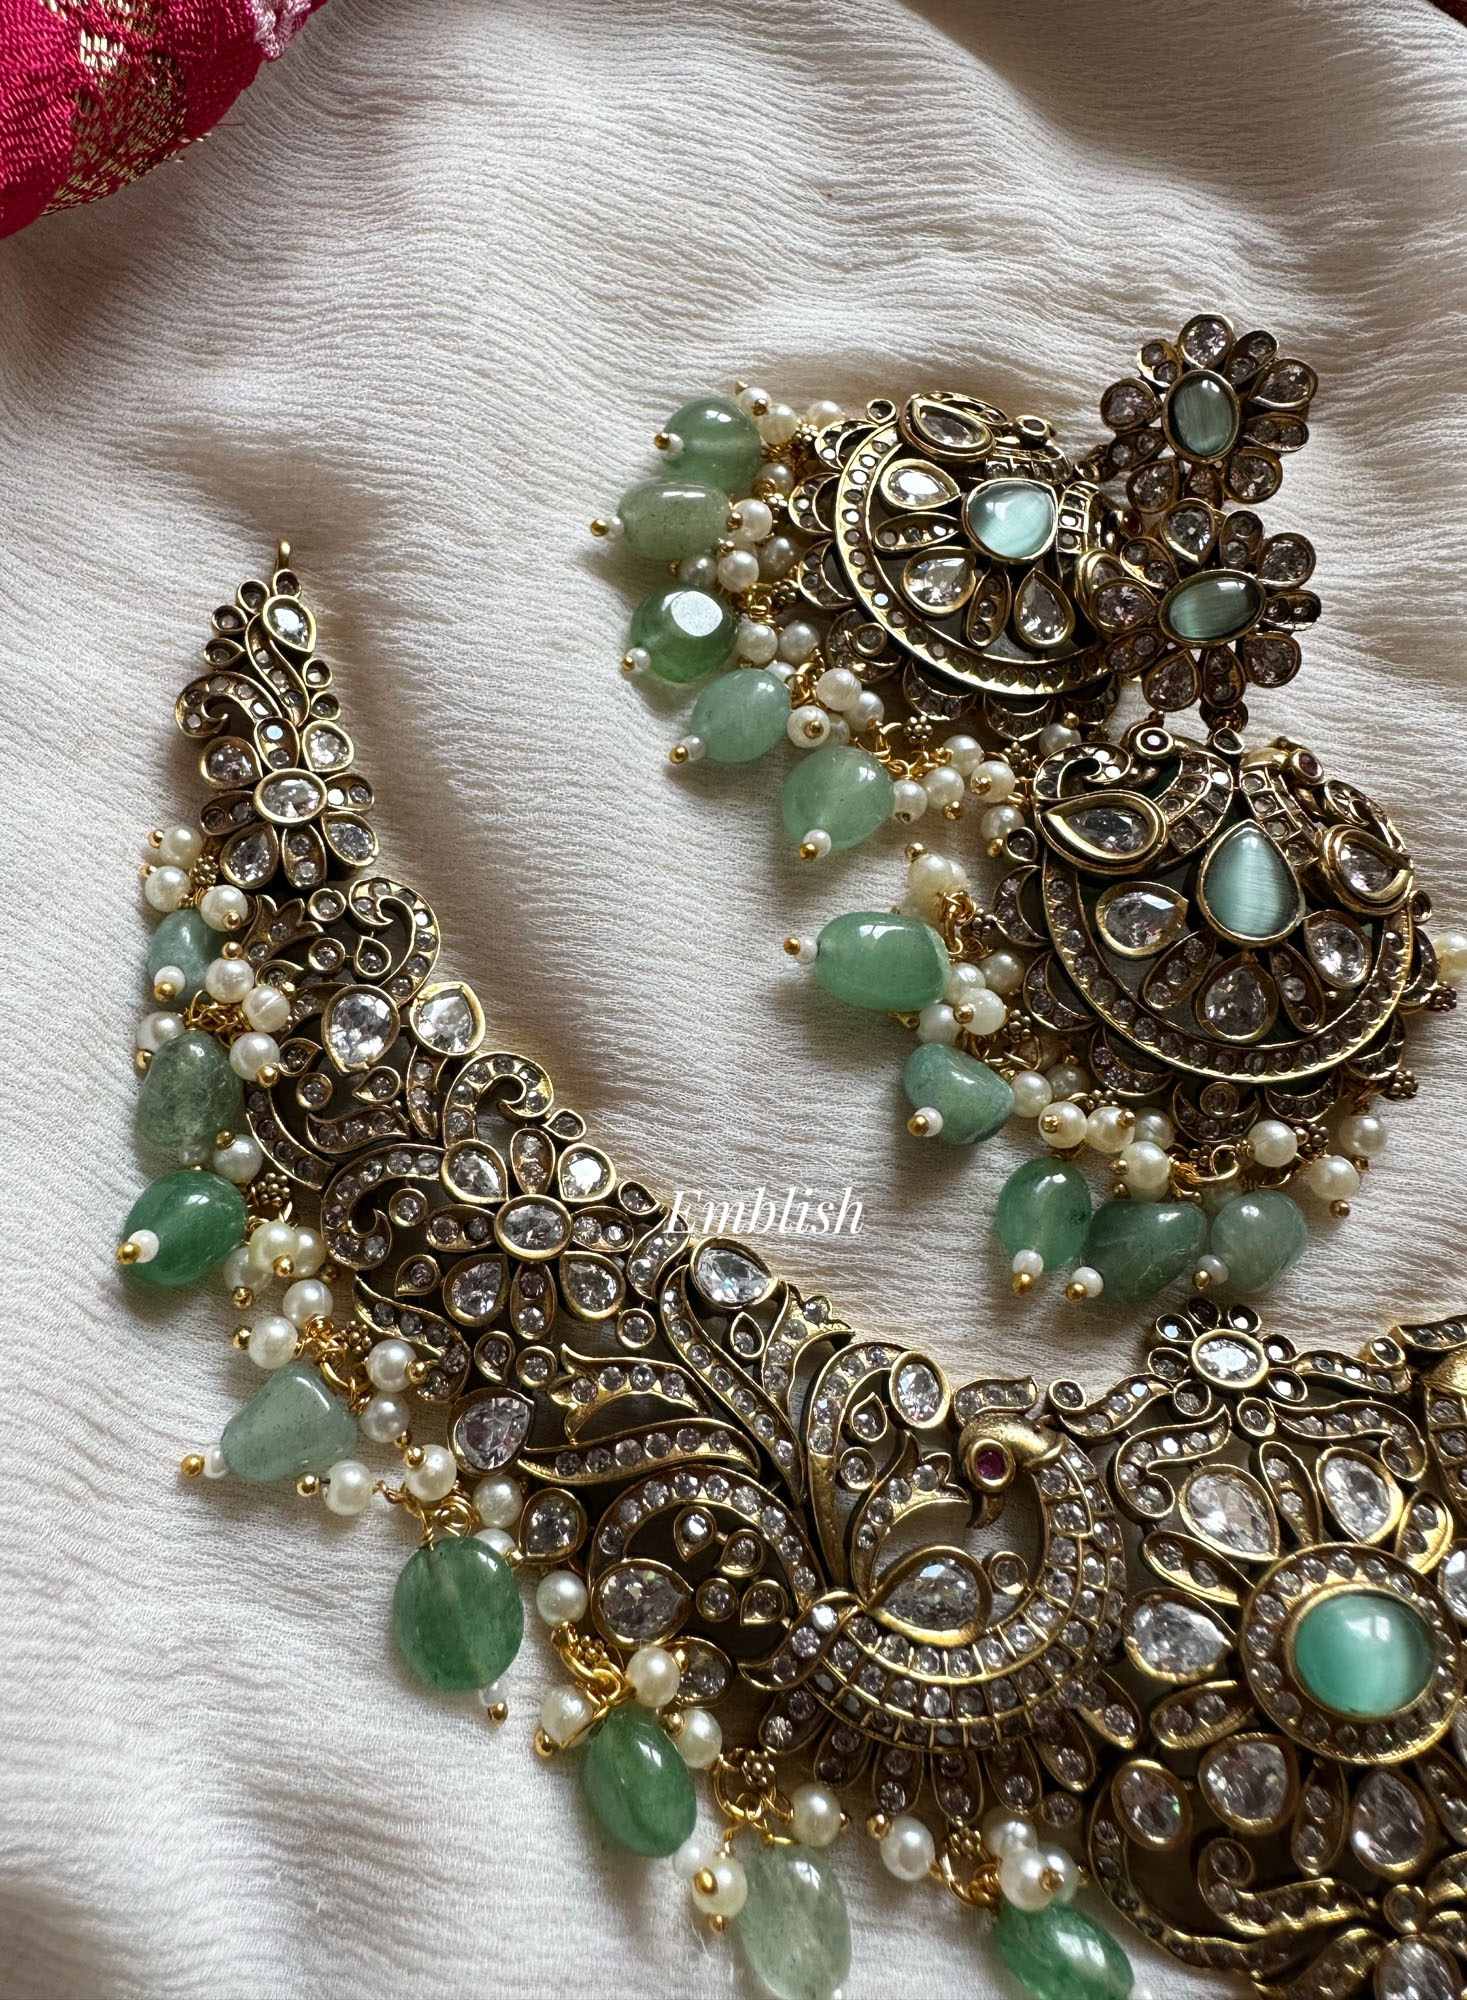 Victorian Flower intricate with double Peacock Neckpiece - Pastel Blue